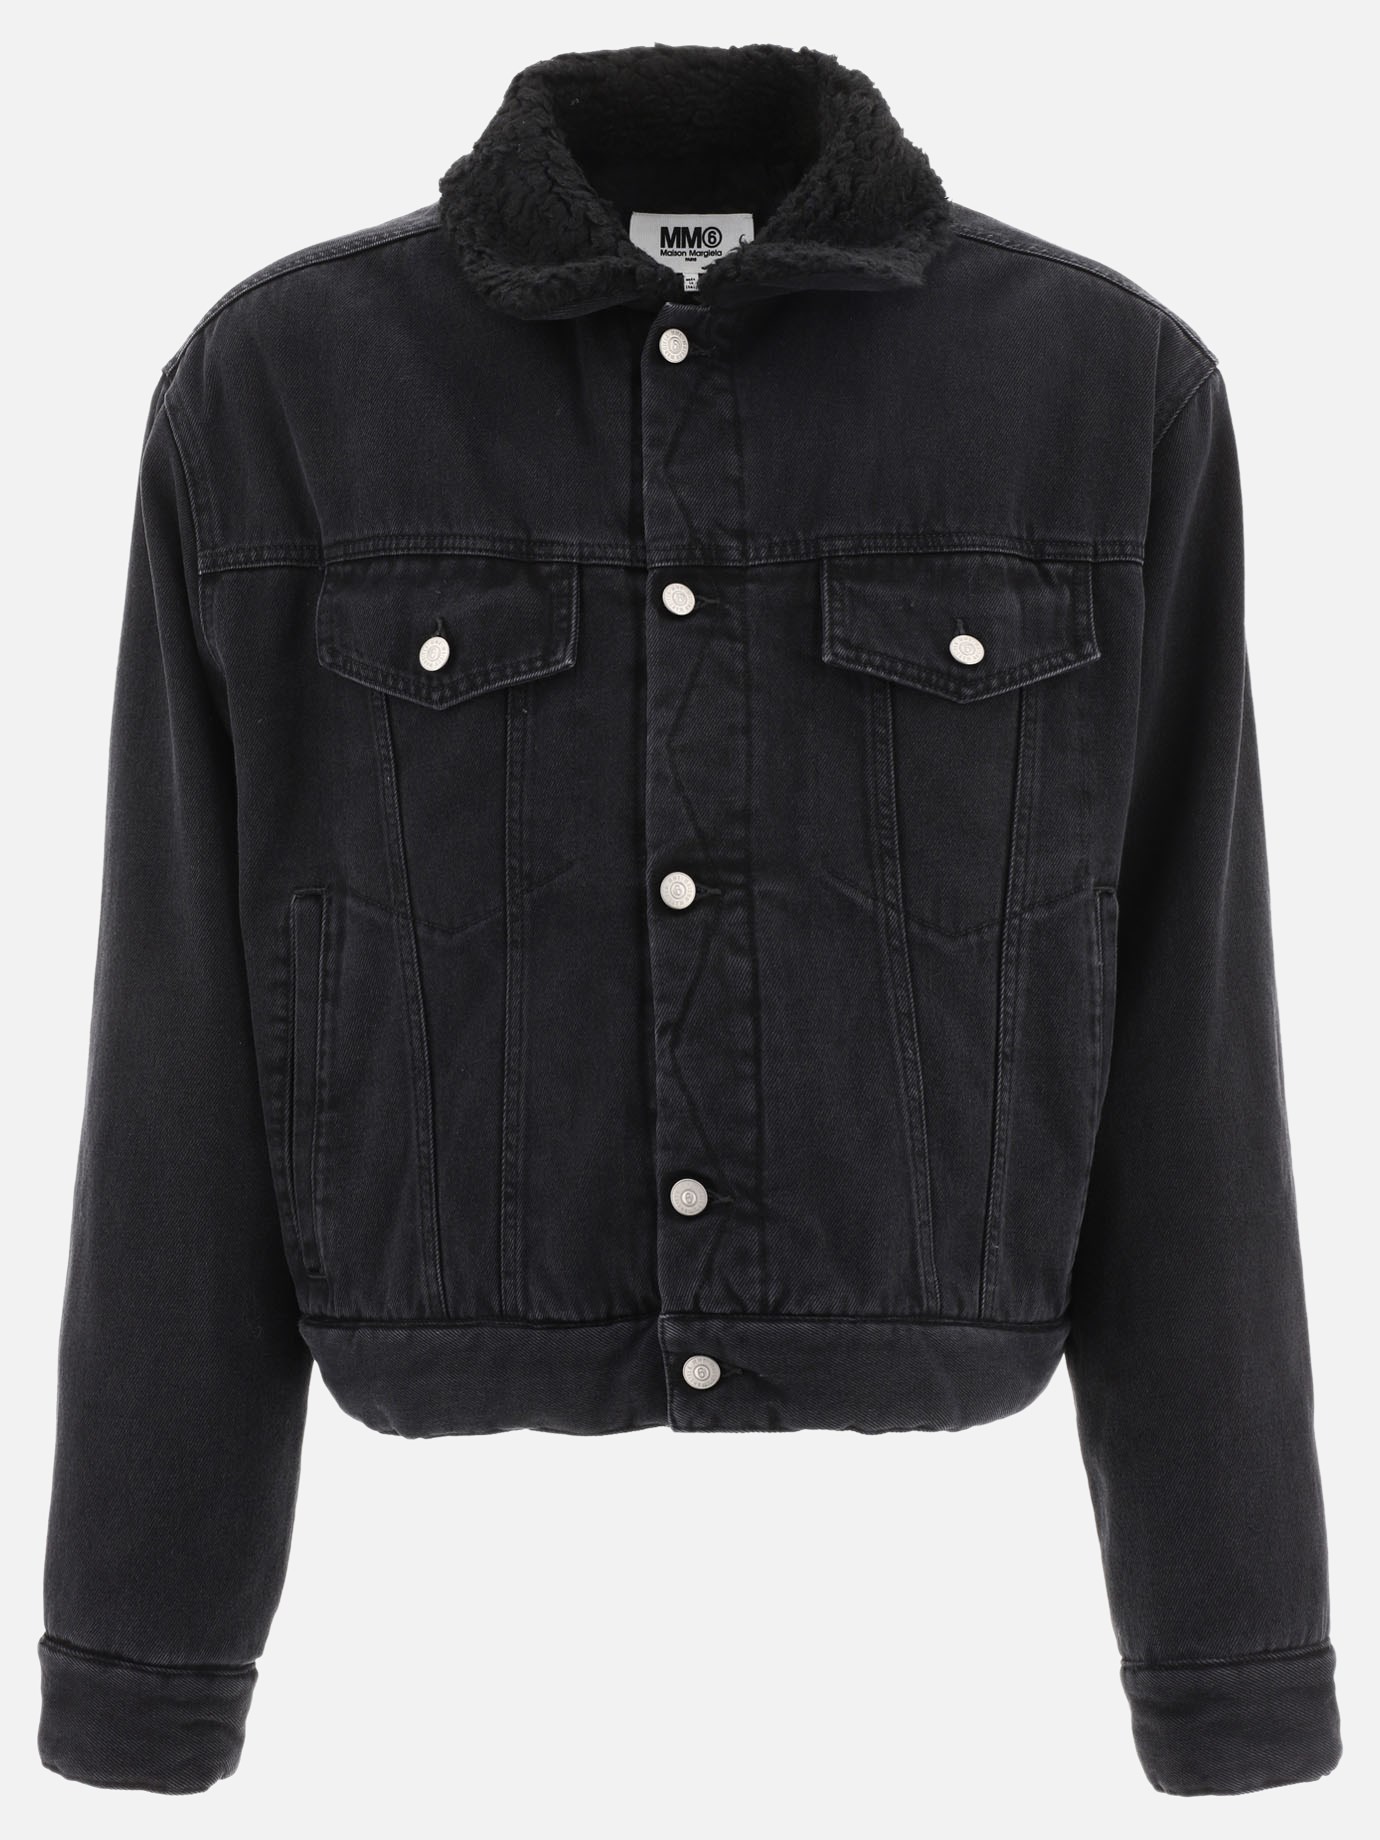 Denim bomber jacket with shearling collar